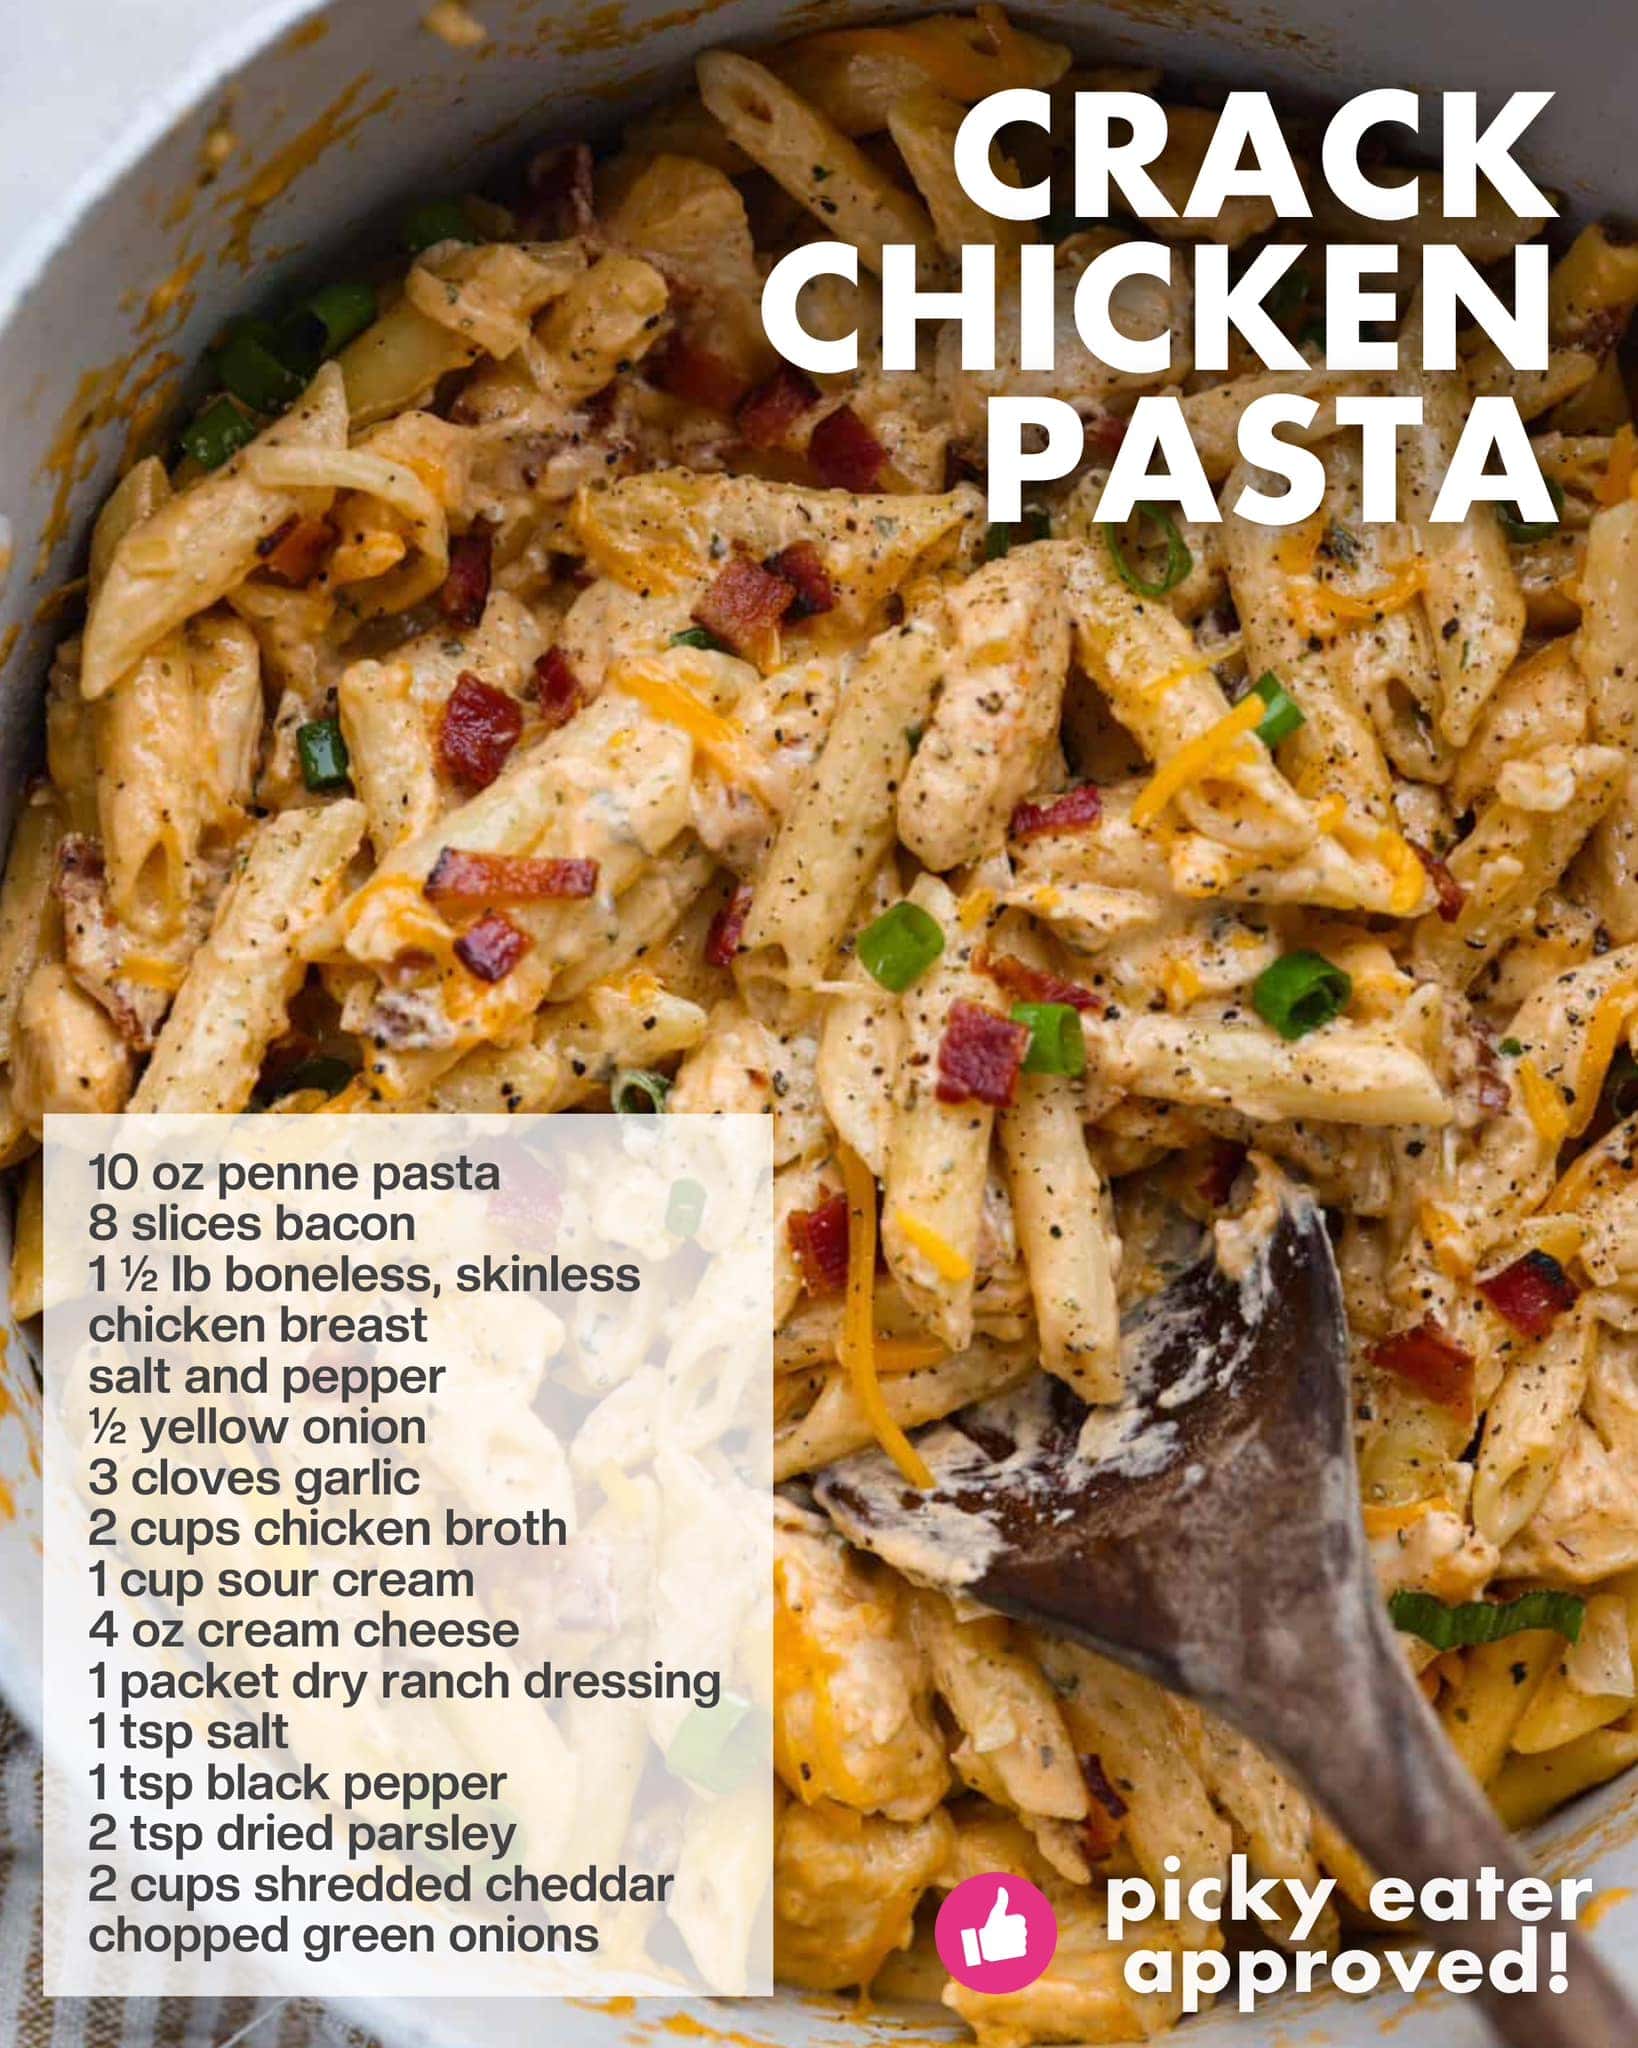 An image featuring a close-up view of crack chicken pasta, garnished with bacon bits and green onions, alongside a recipe list with ingredients like penne pasta, bacon, chicken breast, and a caption